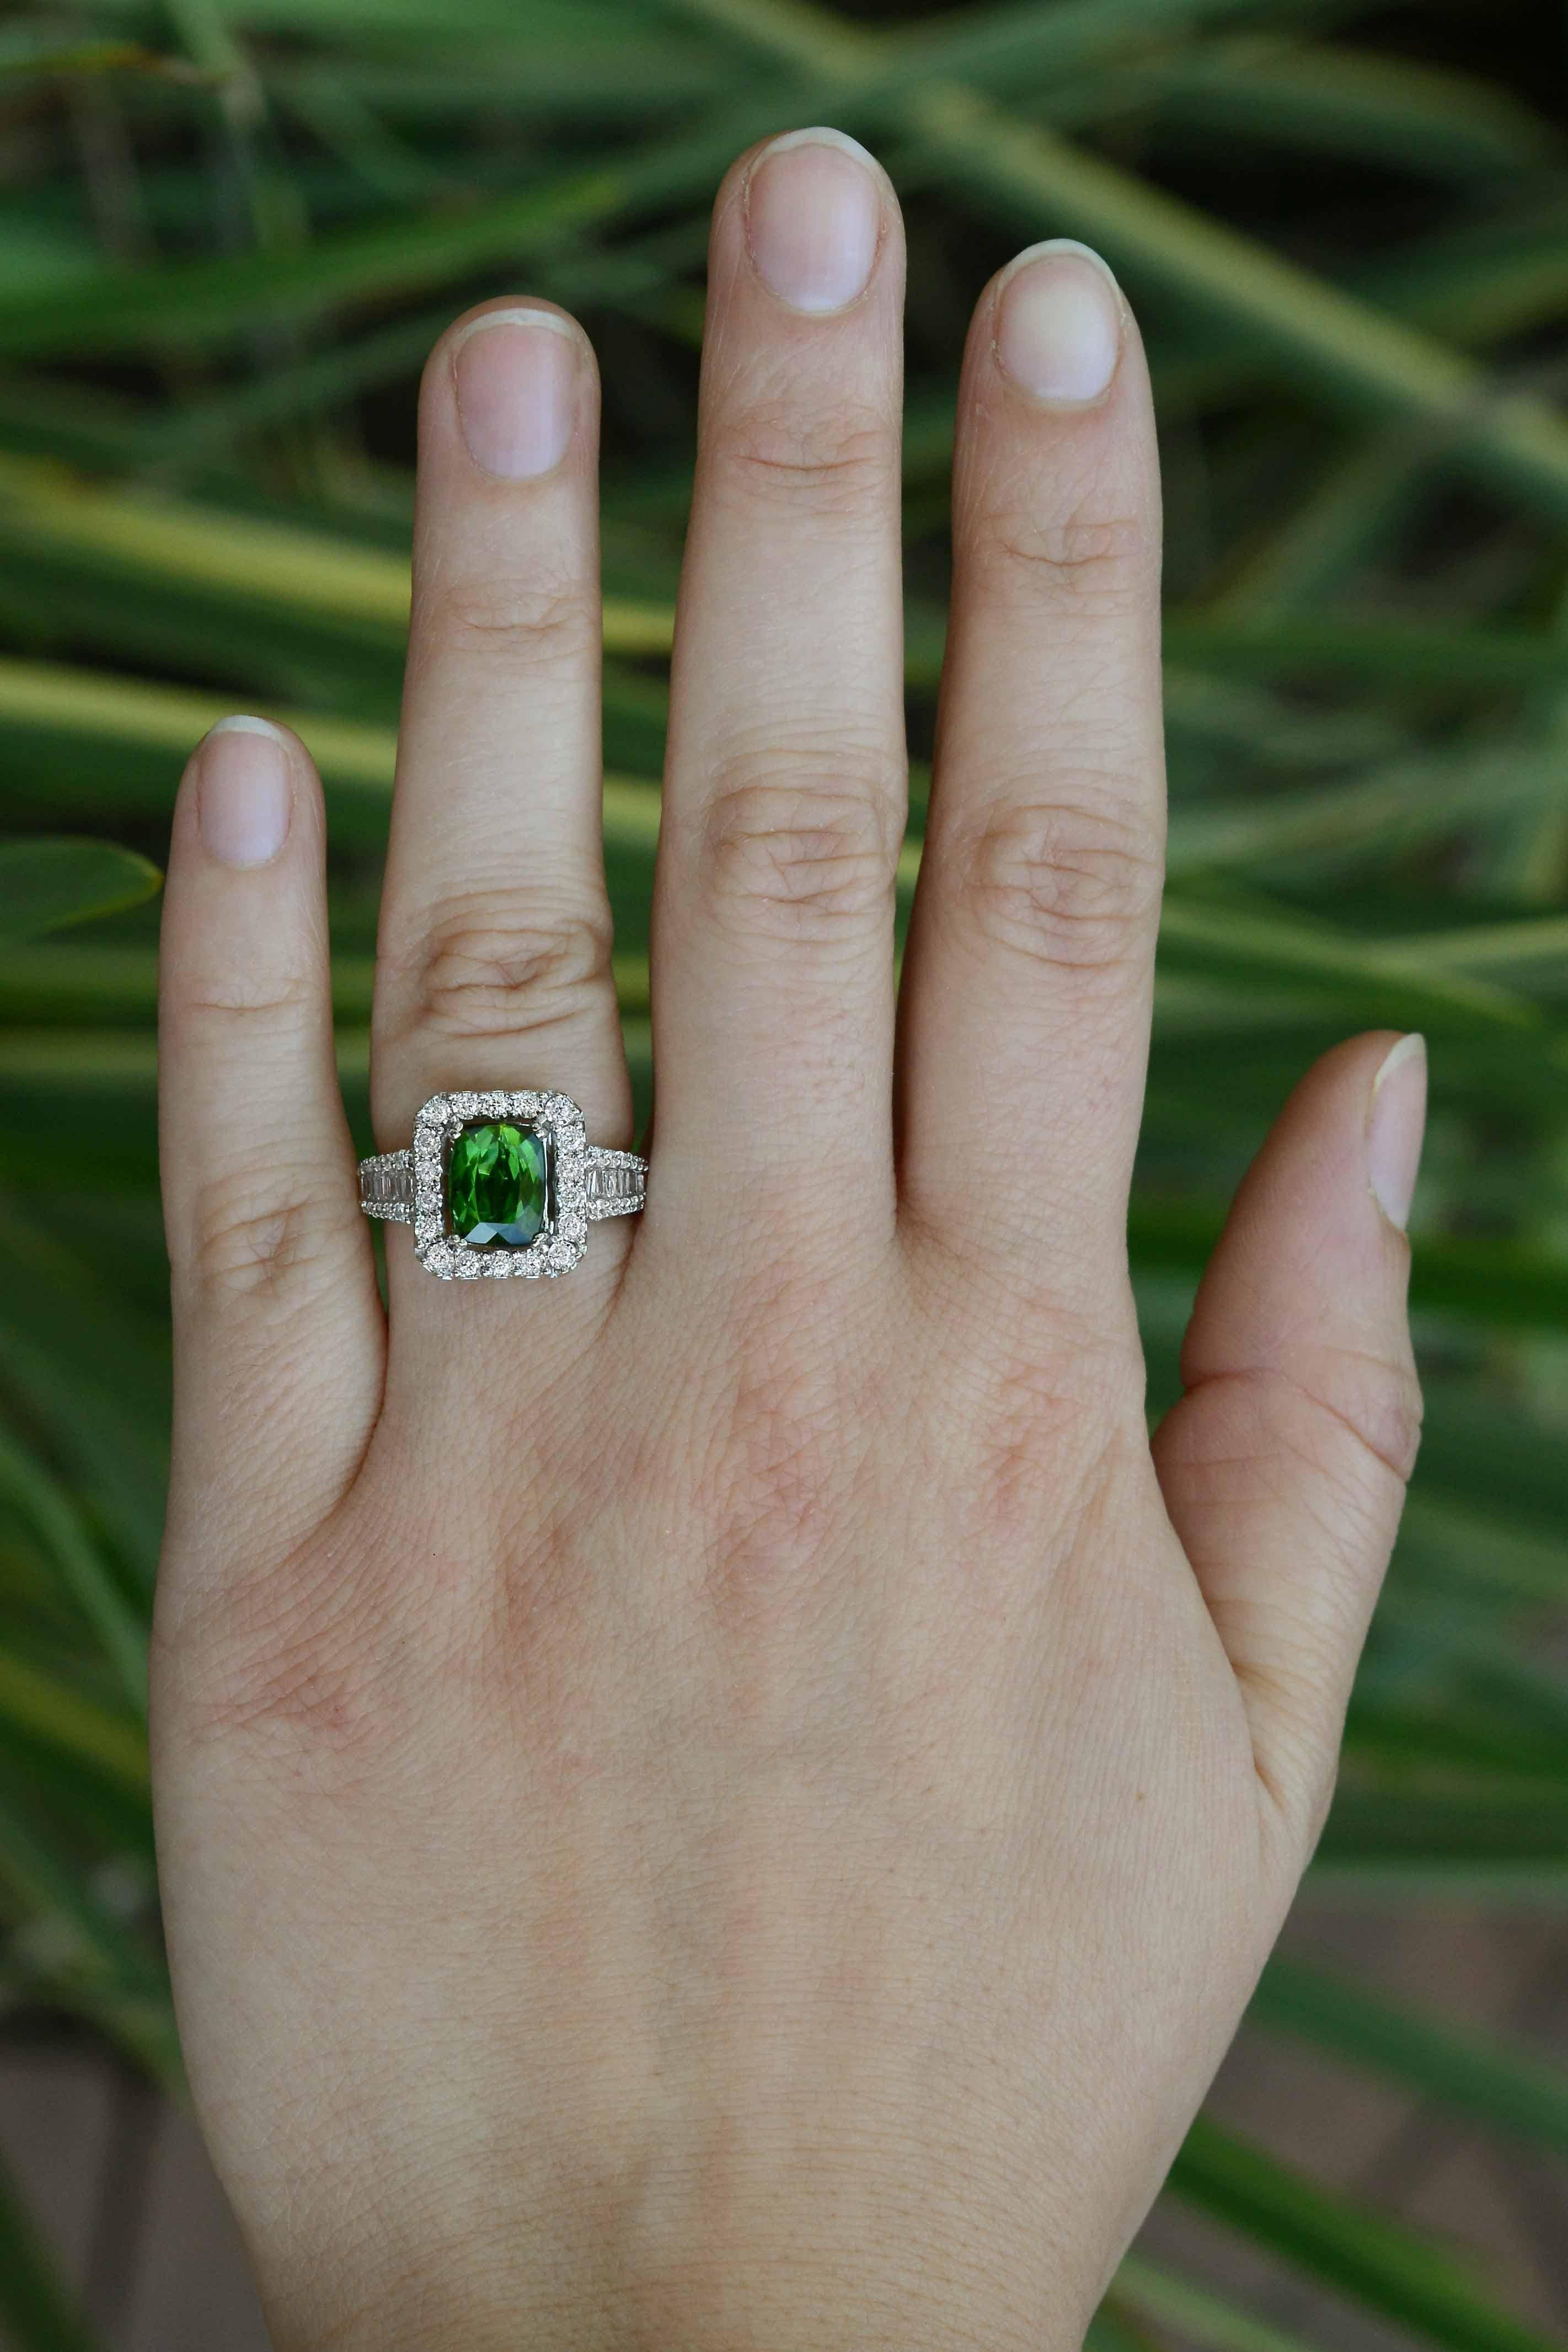 A vivid green tourmaline set in a ravishing diamond embedded white gold setting. The gem displays a rich, forest-green color that beams off your hand. The rectangular halo of glimmering diamonds as well as the cascading composition of baguette and